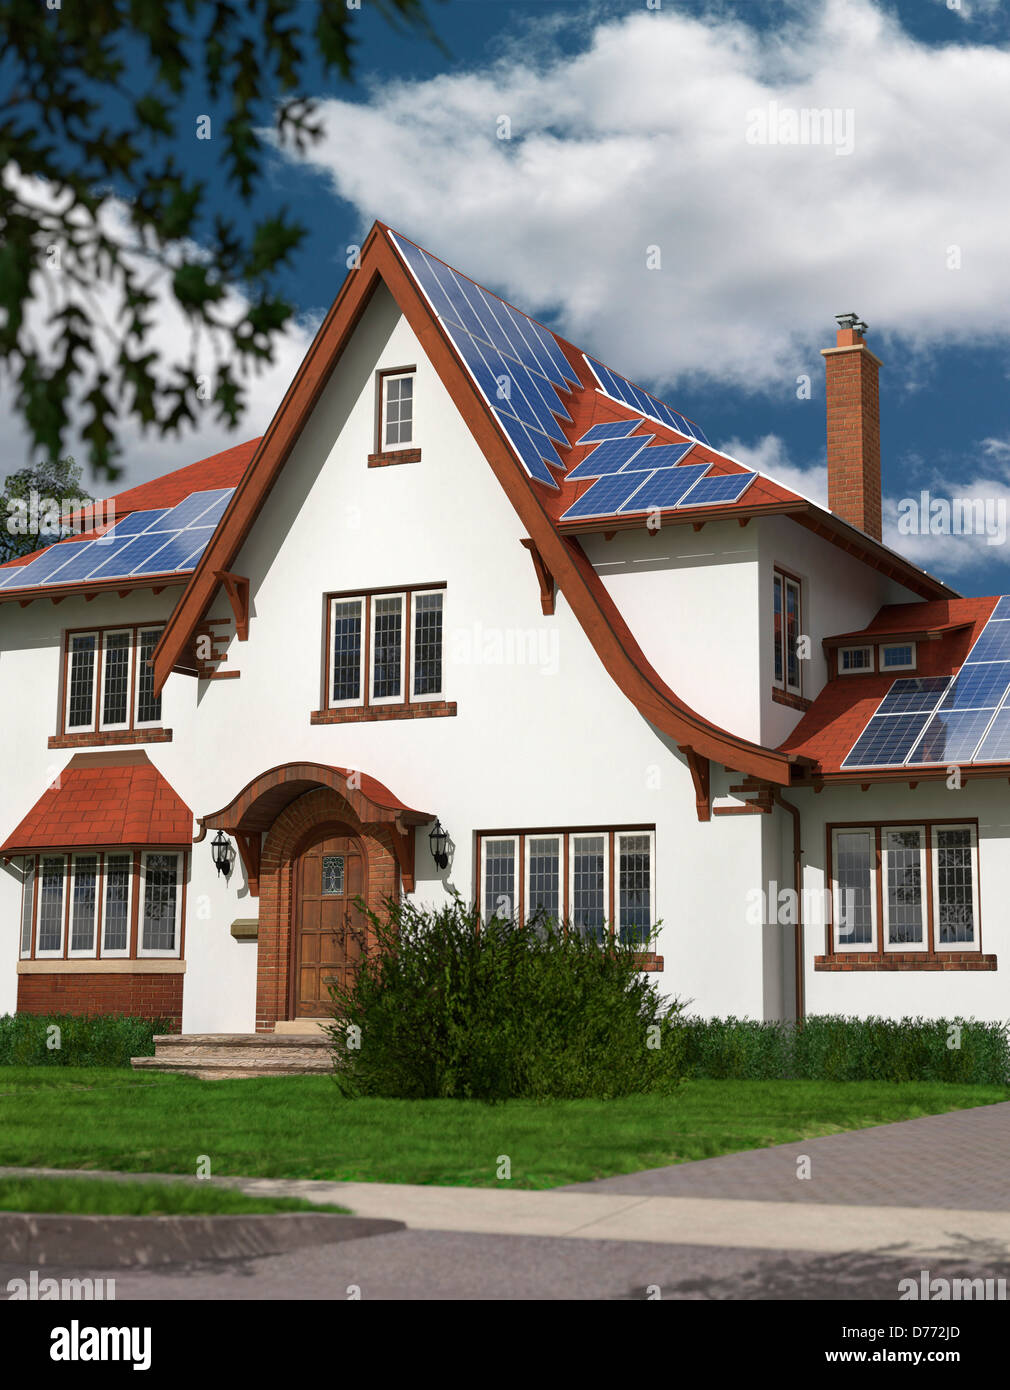 Detached family house with solar panels on the roof powered by solar energy. Sustainable development, renewable energy concept Stock Photo